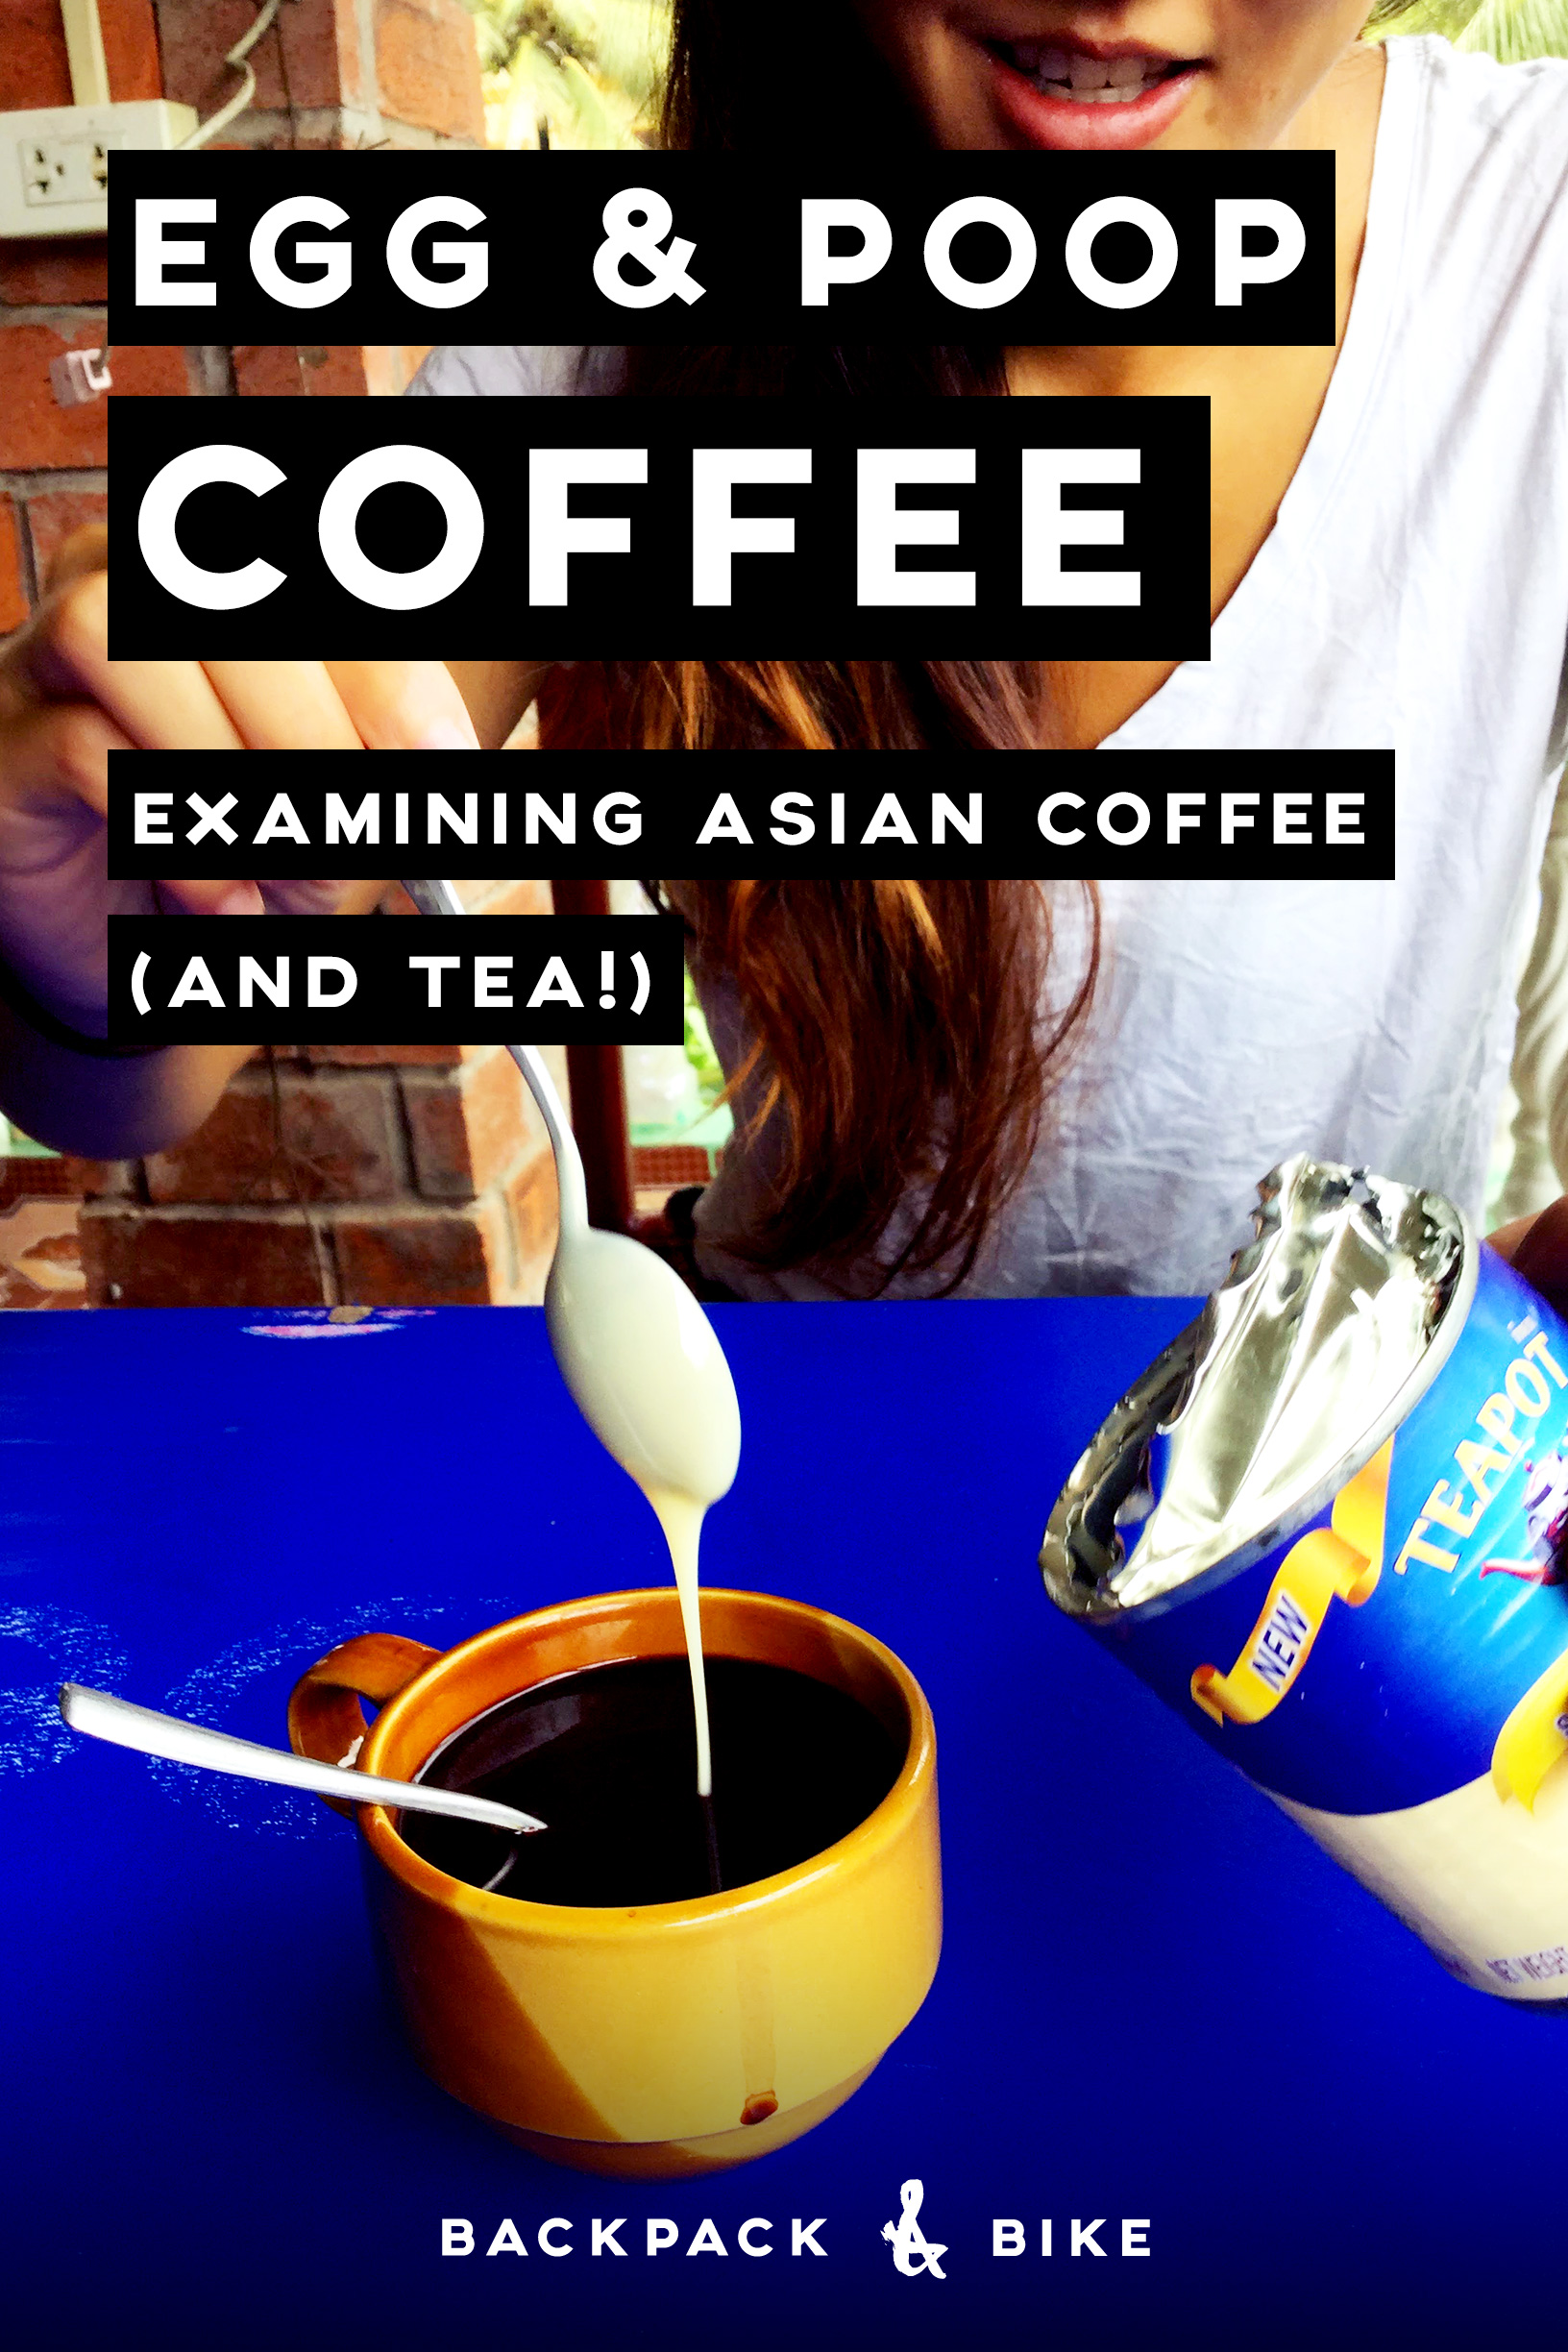 From Egg to Poop Coffee | Examining Asian Coffee (and tea!) | Taking a look at the wild coffee and tea styles of Southeast Asia that a foodie must try during your travels!